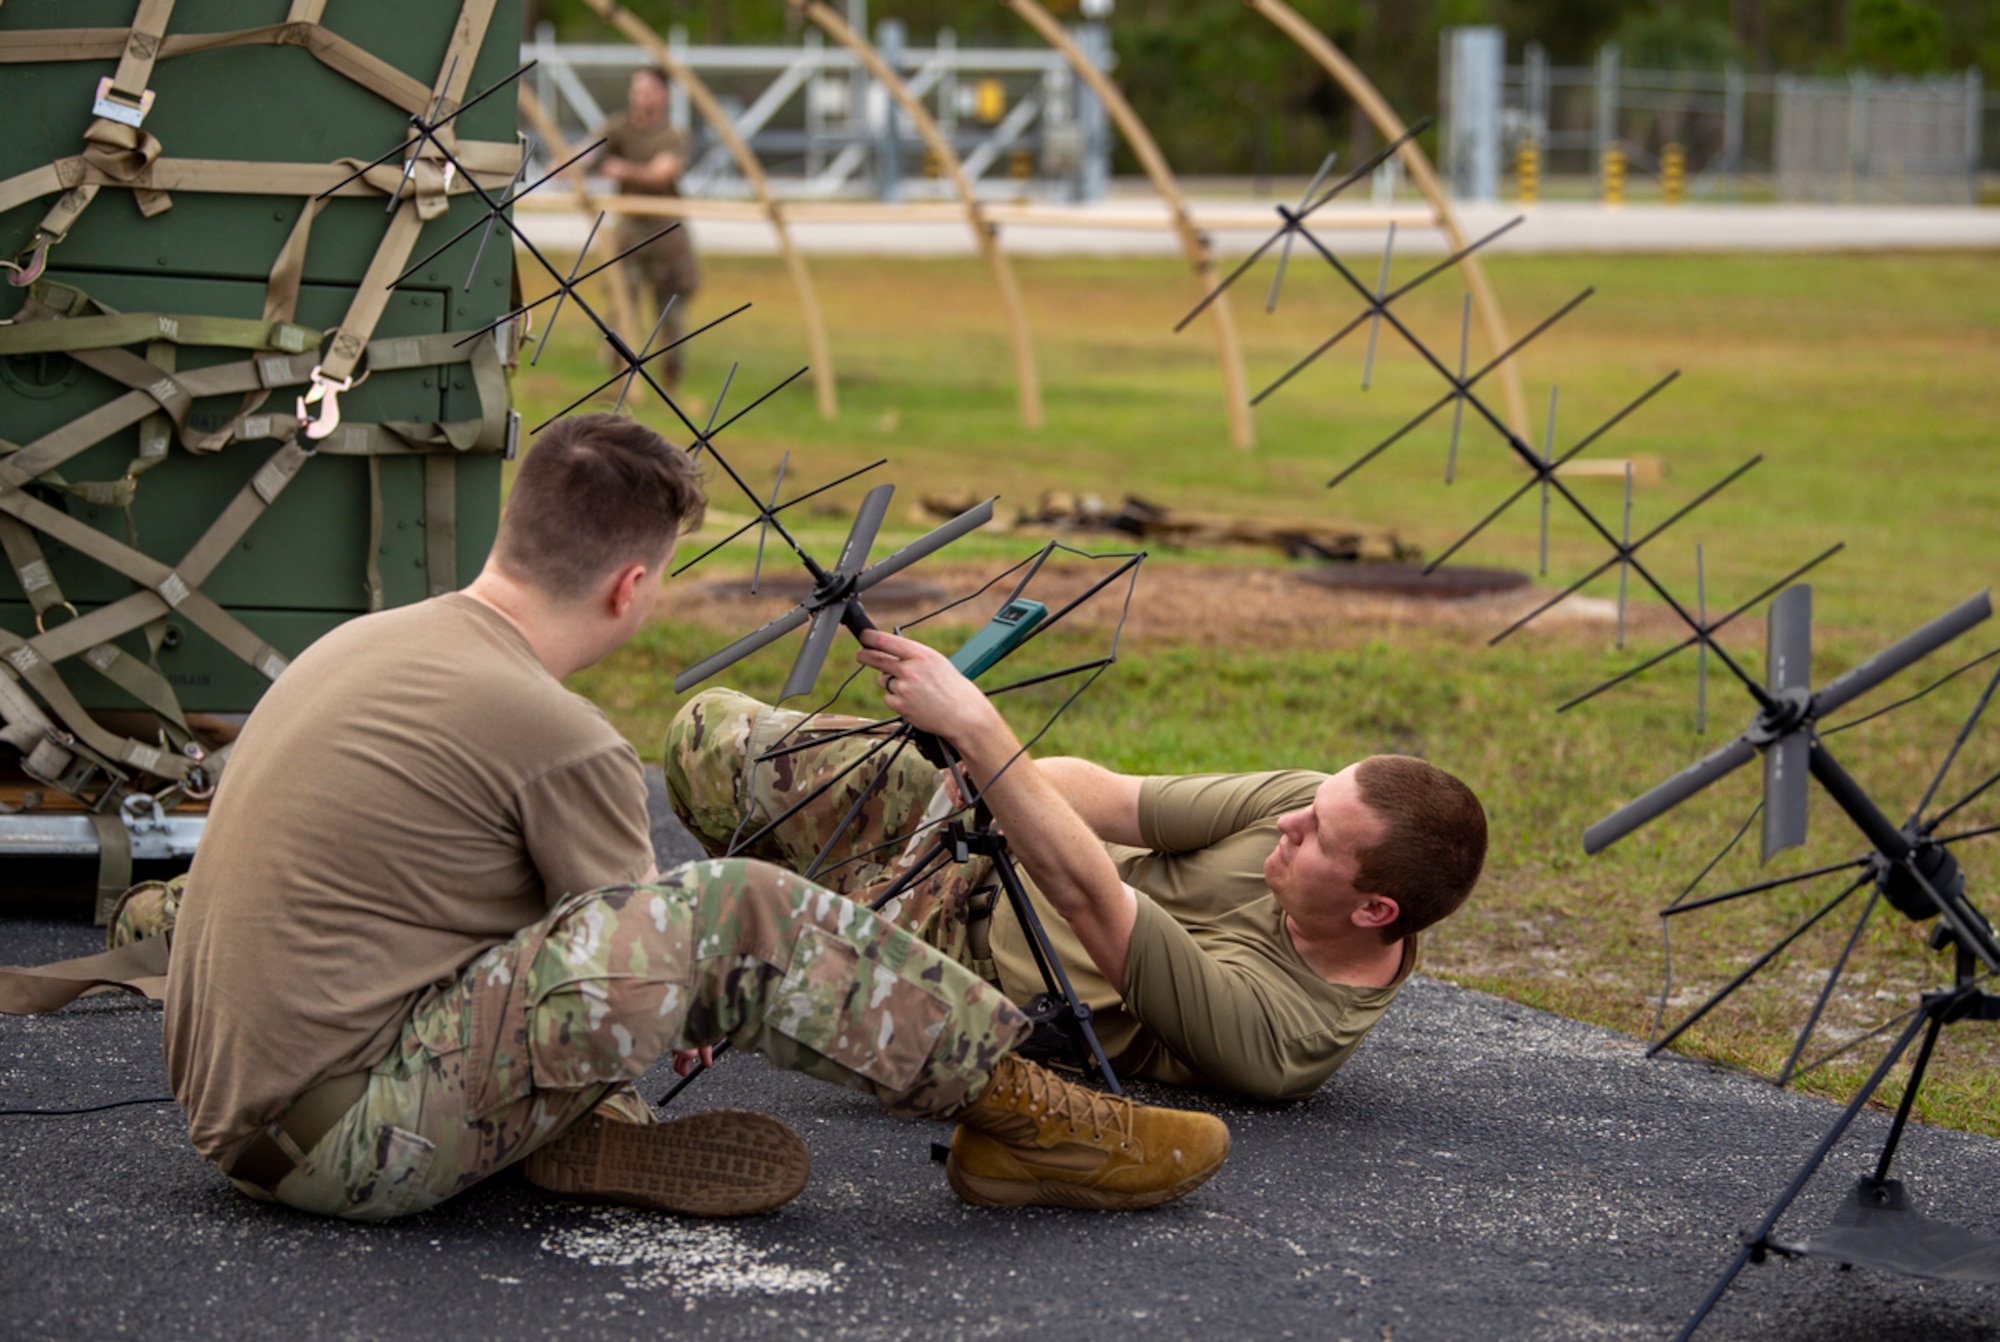 Mosaic Tiger 24-1 participants set up antennas at Avon Park Air Force Range, Florida, Nov. 13, 2023. Rapidly deployable communications are essential to an agile and lethal force. (U.S. Air Force photo by Airman 1st Class Leonid Soubbotine)